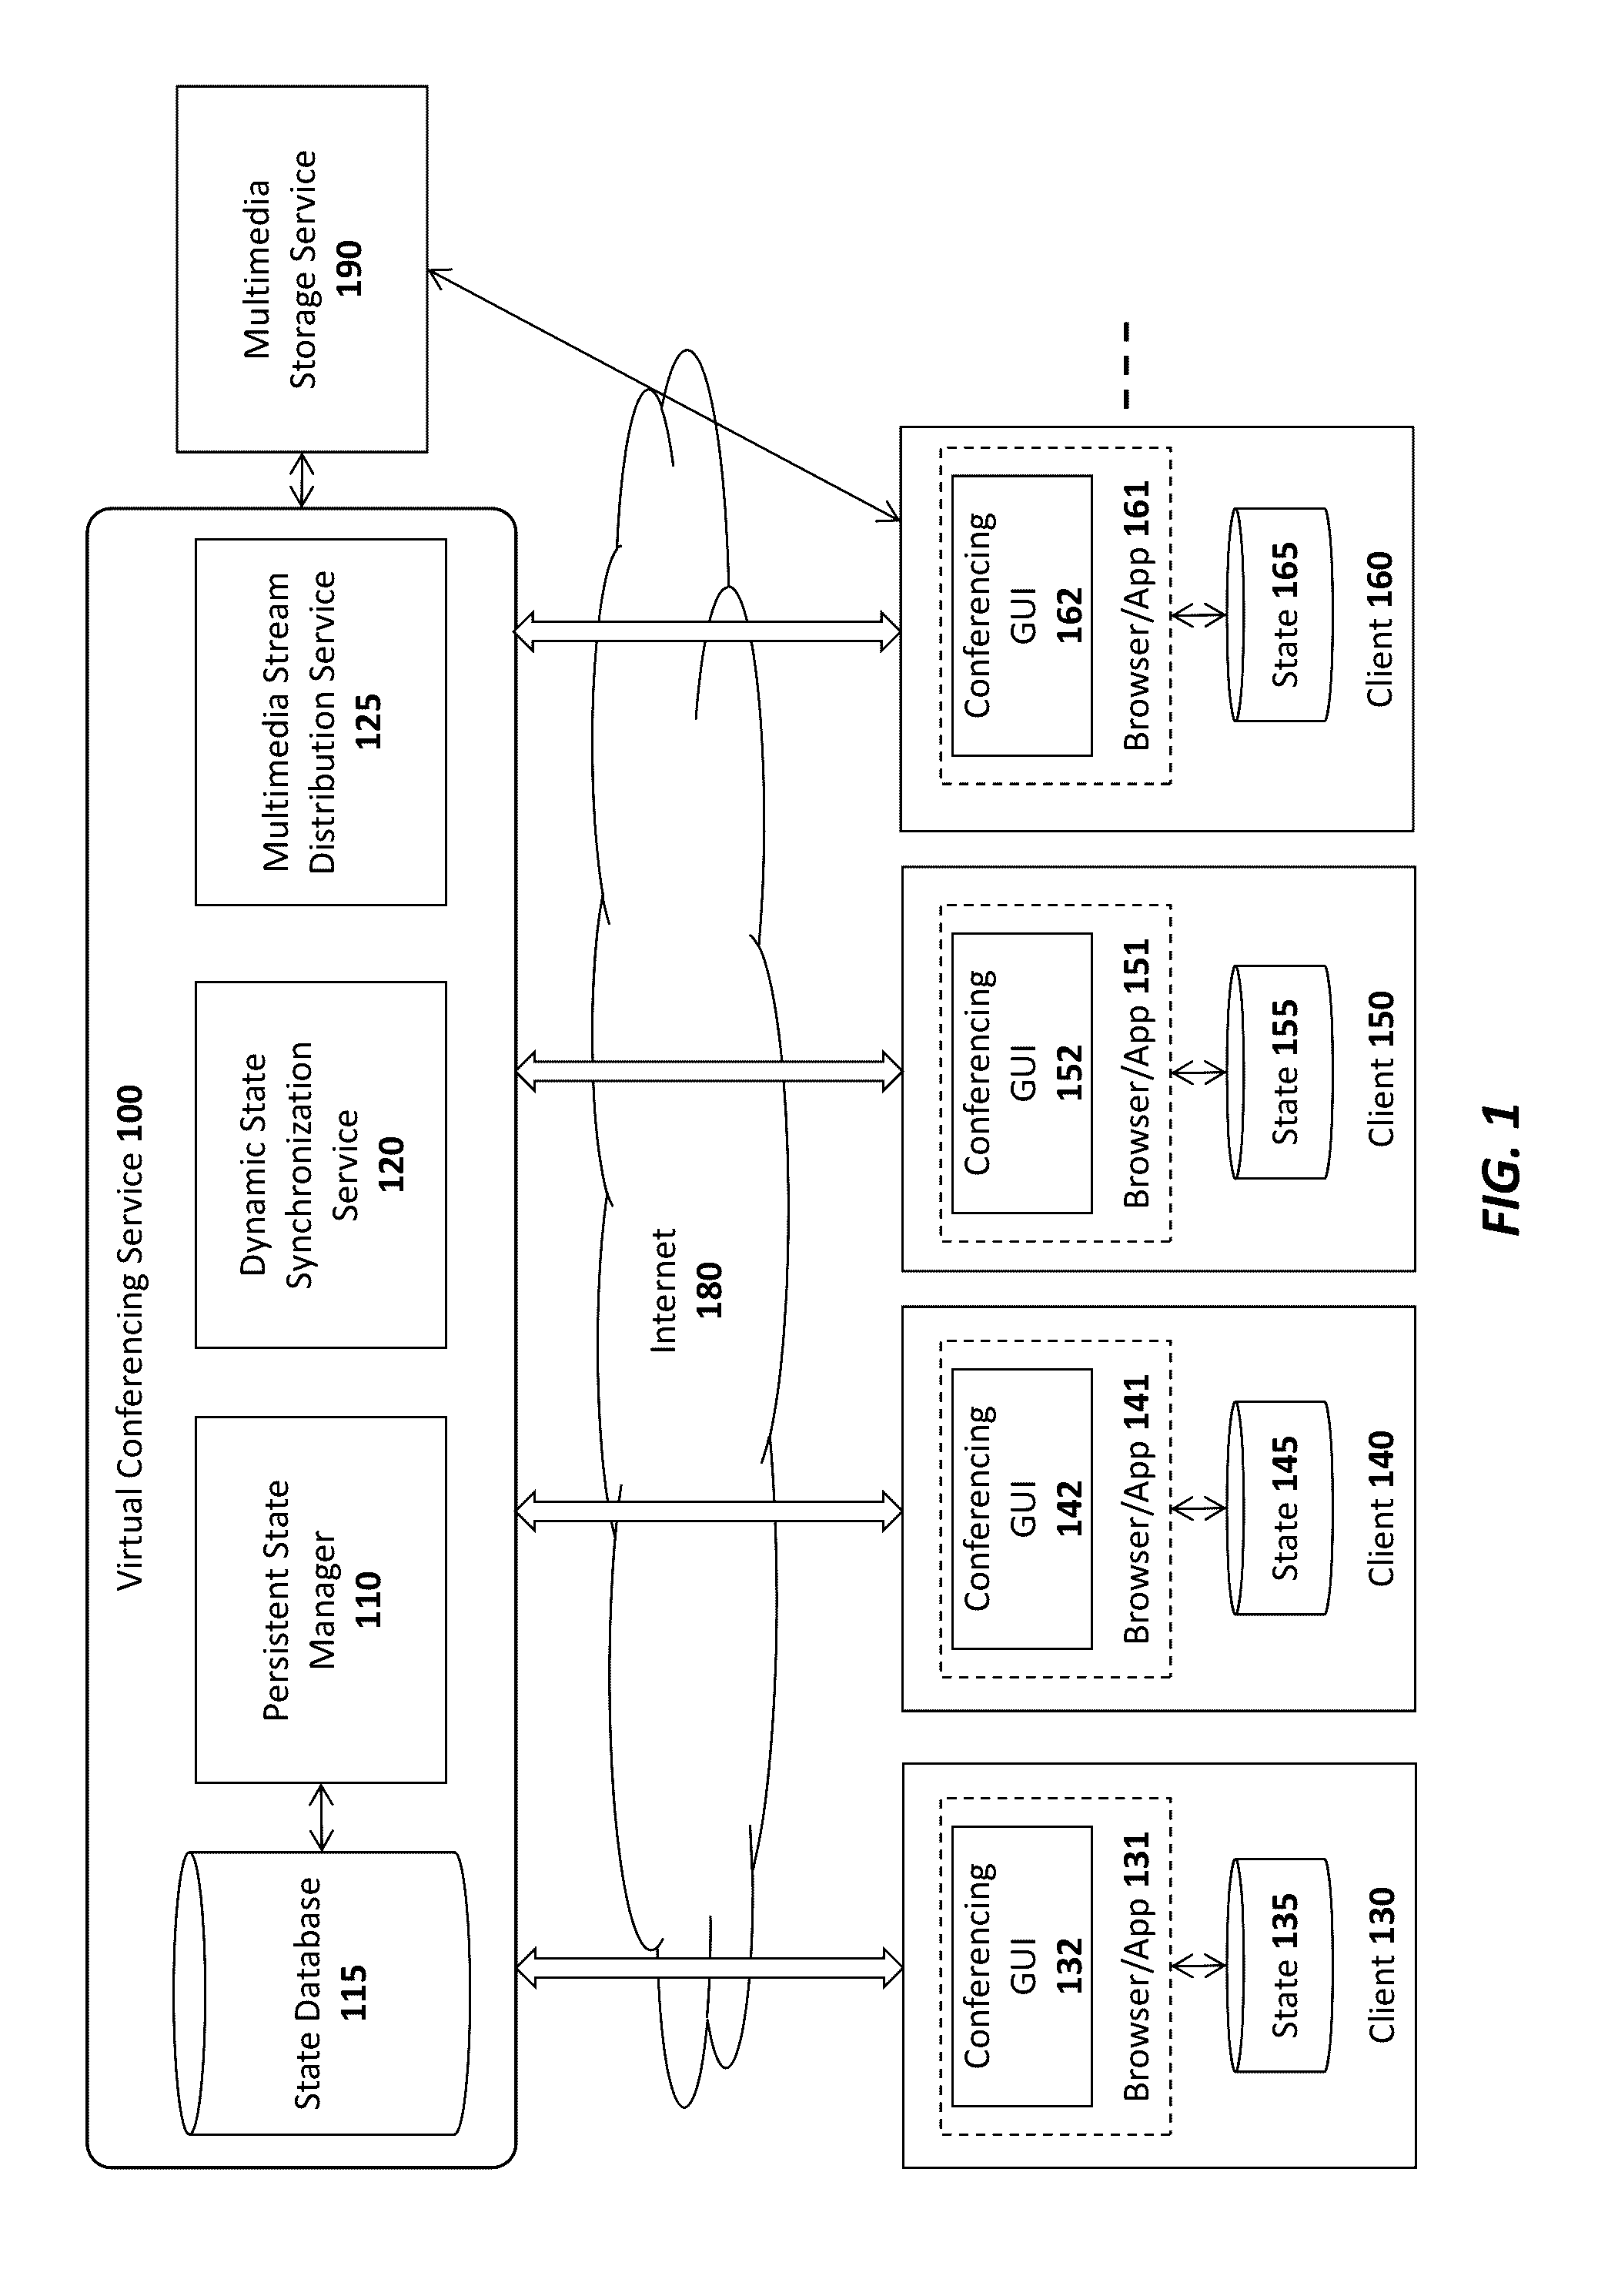 System and method for decision support in a virtual conference